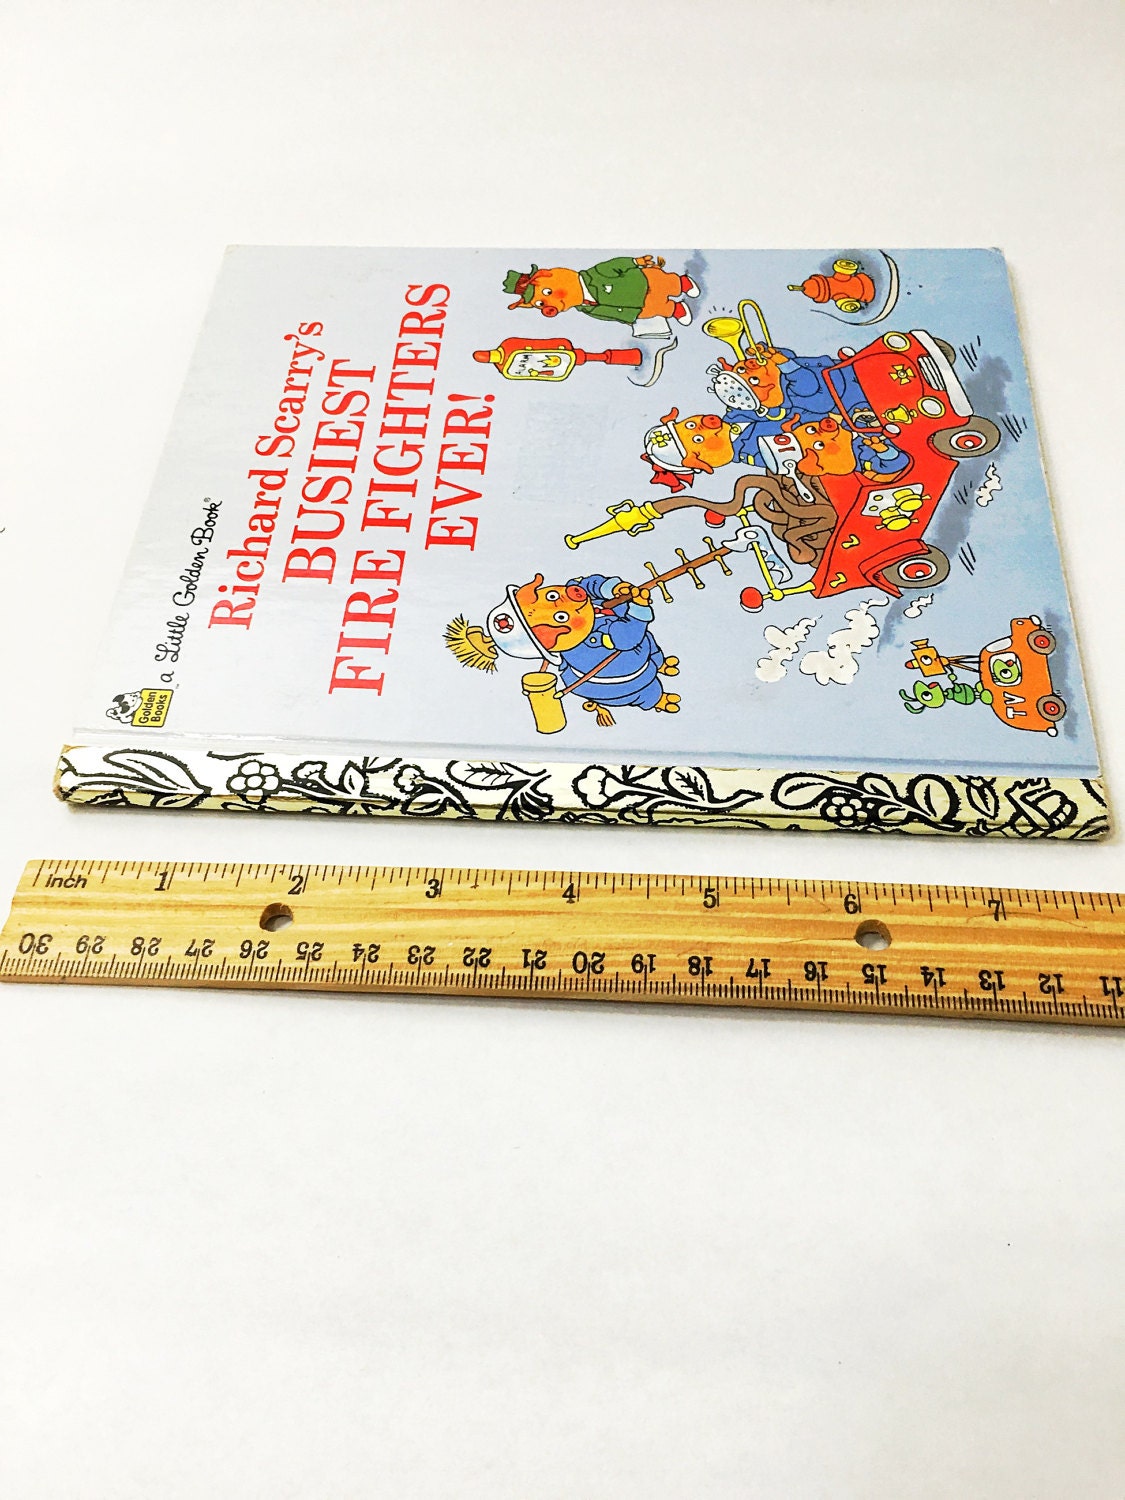 1993 Richard Scarry's Busiest Fire Fighters Ever! Vintage FIRST EDITION Little Golden Book. 93-78415. Vintage Collectible Hardback Book.